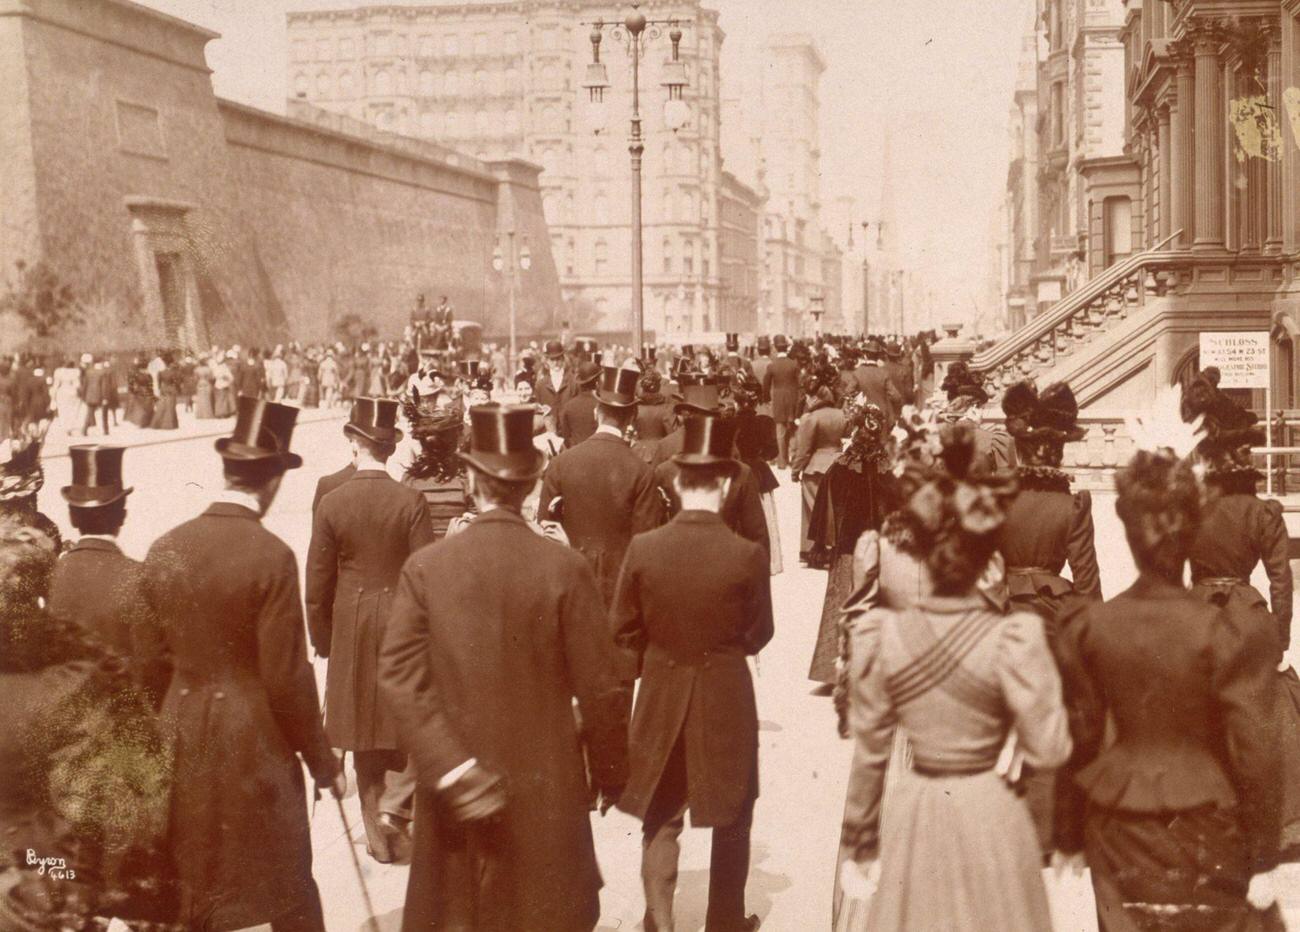 Men And Women Walk With Their Backs To The Camera, Wearing Formal Top Hats And Dresses, In The Easter Parade, On Fifth Avenue, 1893